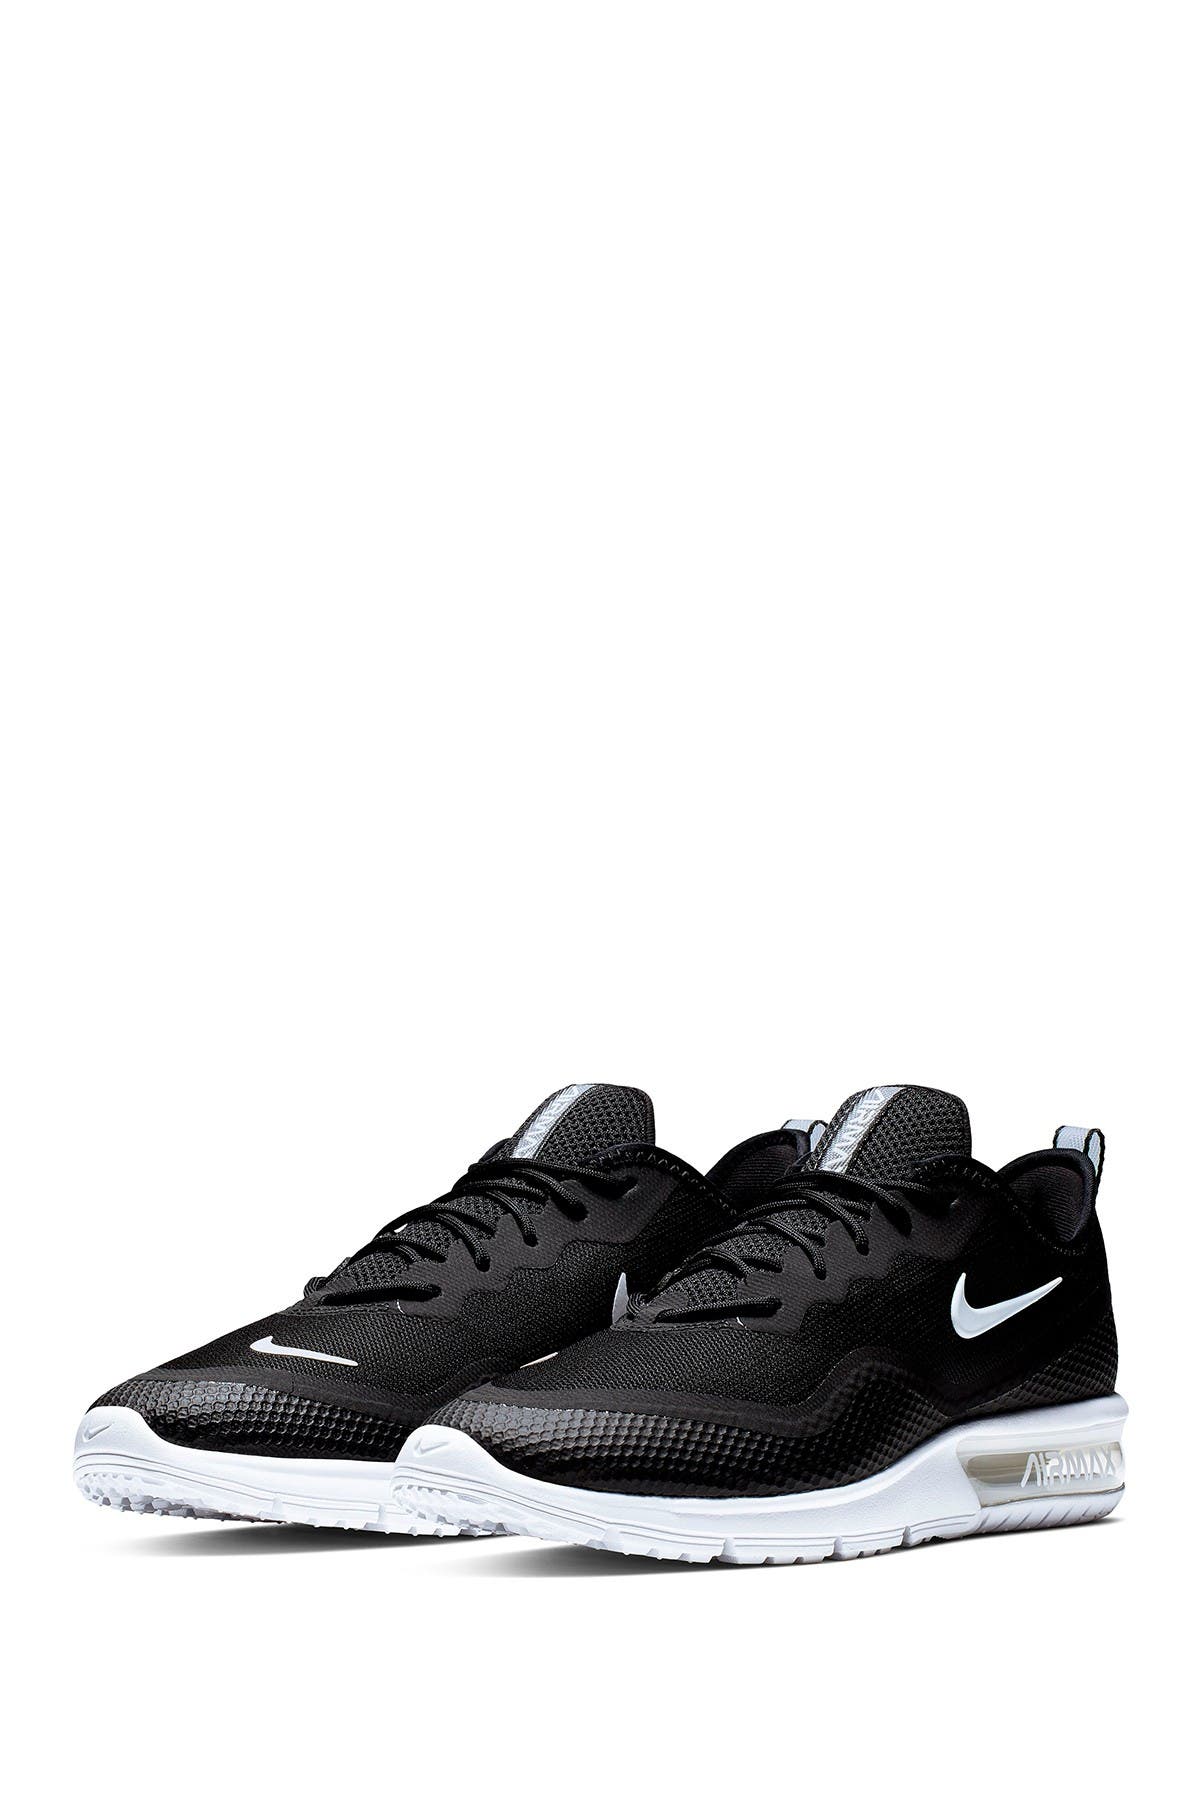 air max sequent 4.5 black and white